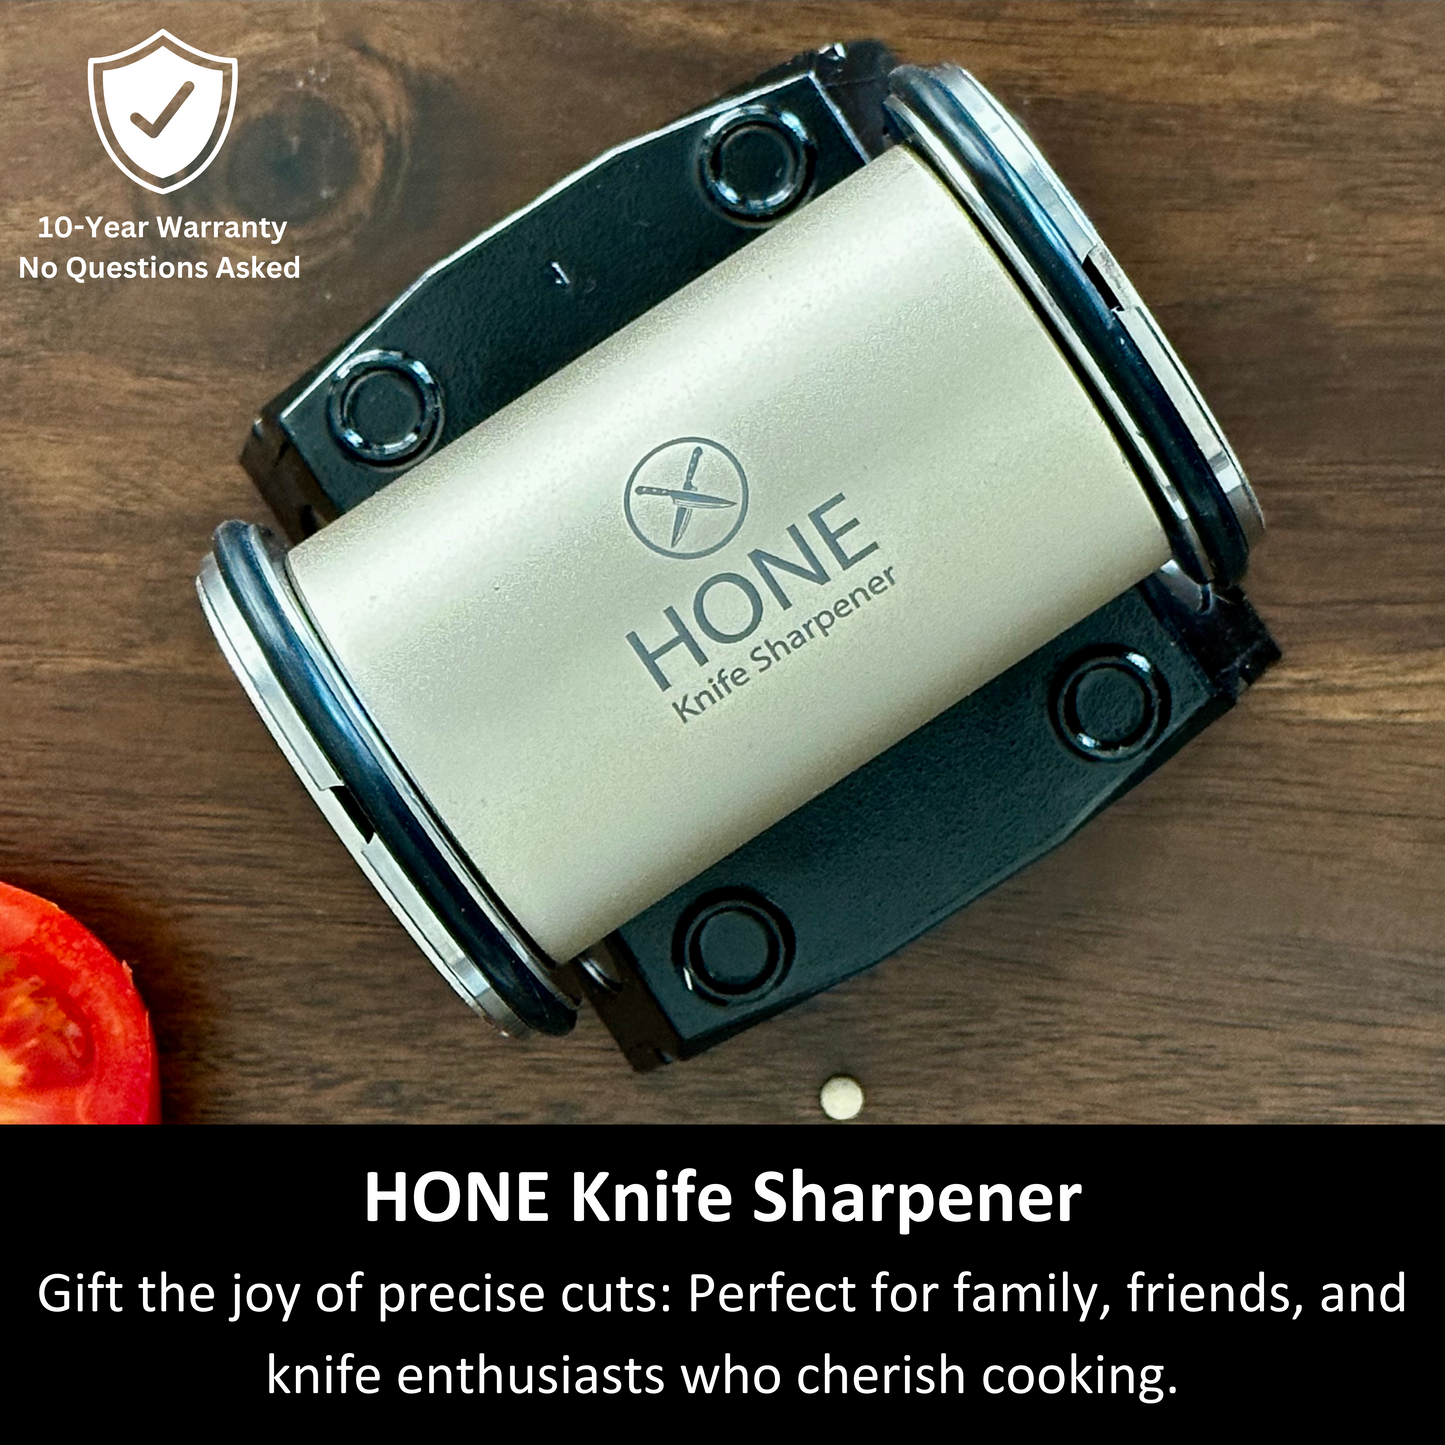 HONE Knife Sharpener: Engineered in Canada (Free #3000 Ceramic Disc (CAD 45 Value) with HONE Knife Sharpener purchase.)